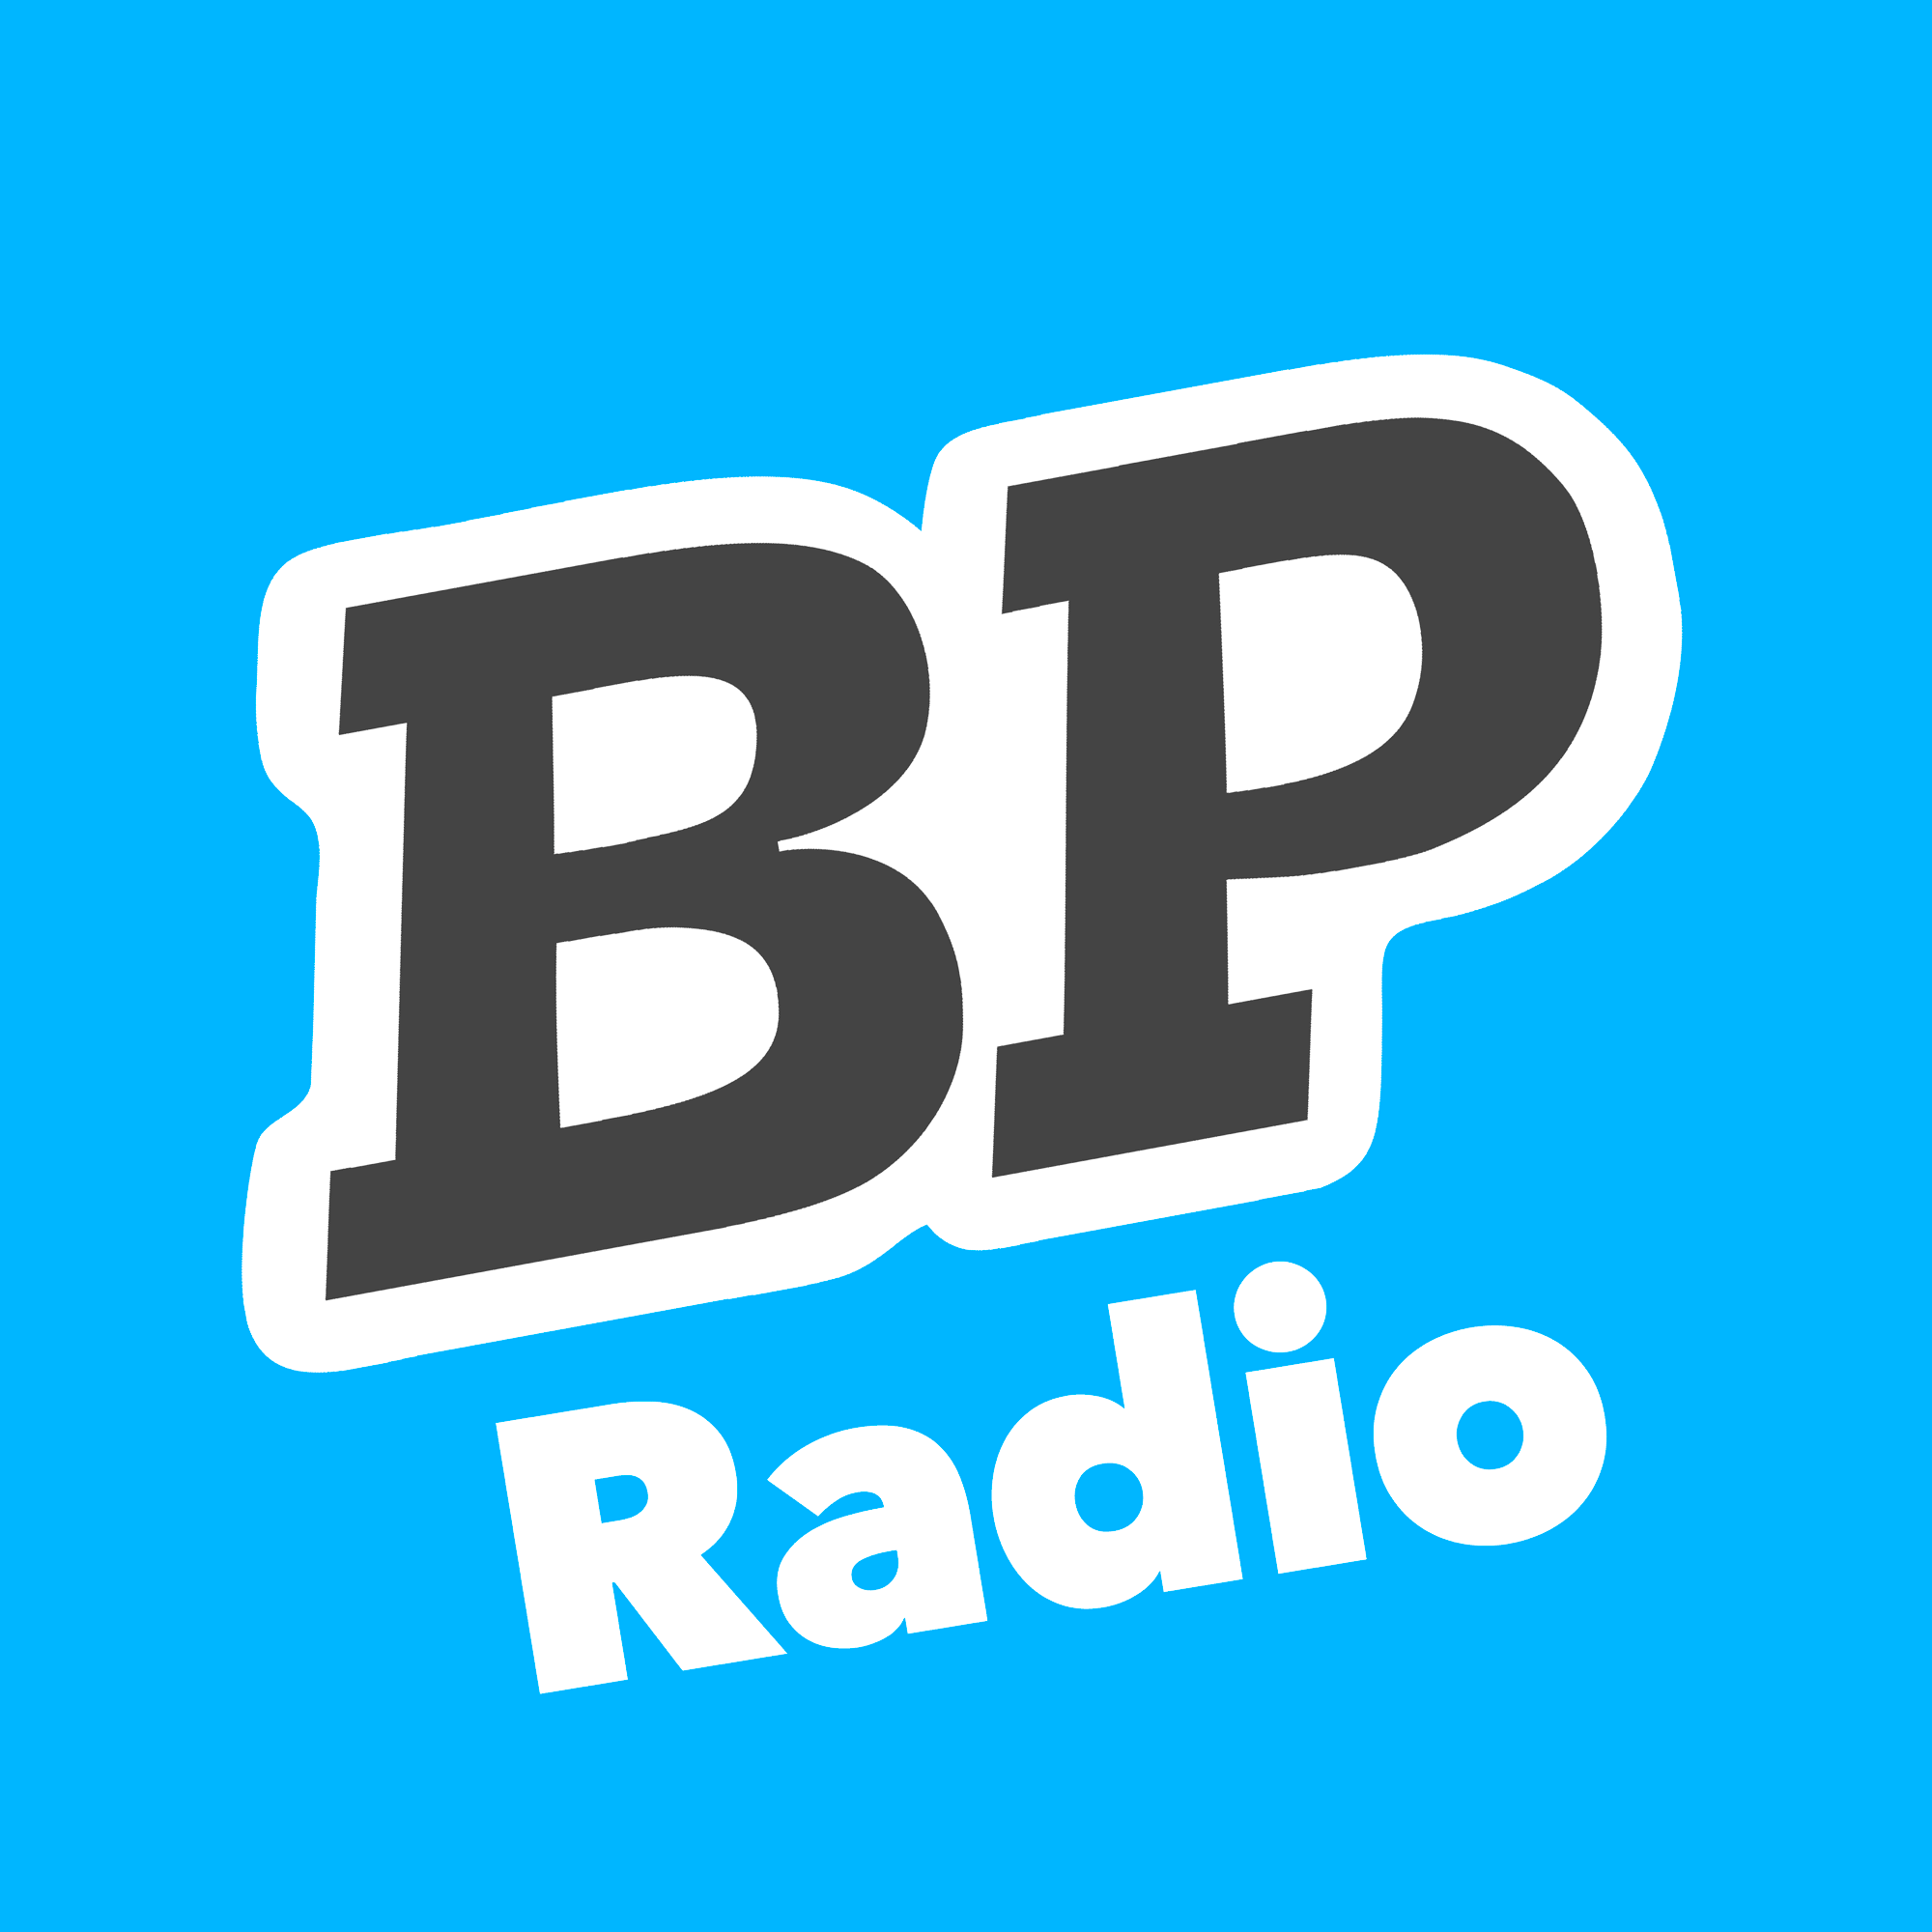 This is the Brooklyn Paper Radio logo.